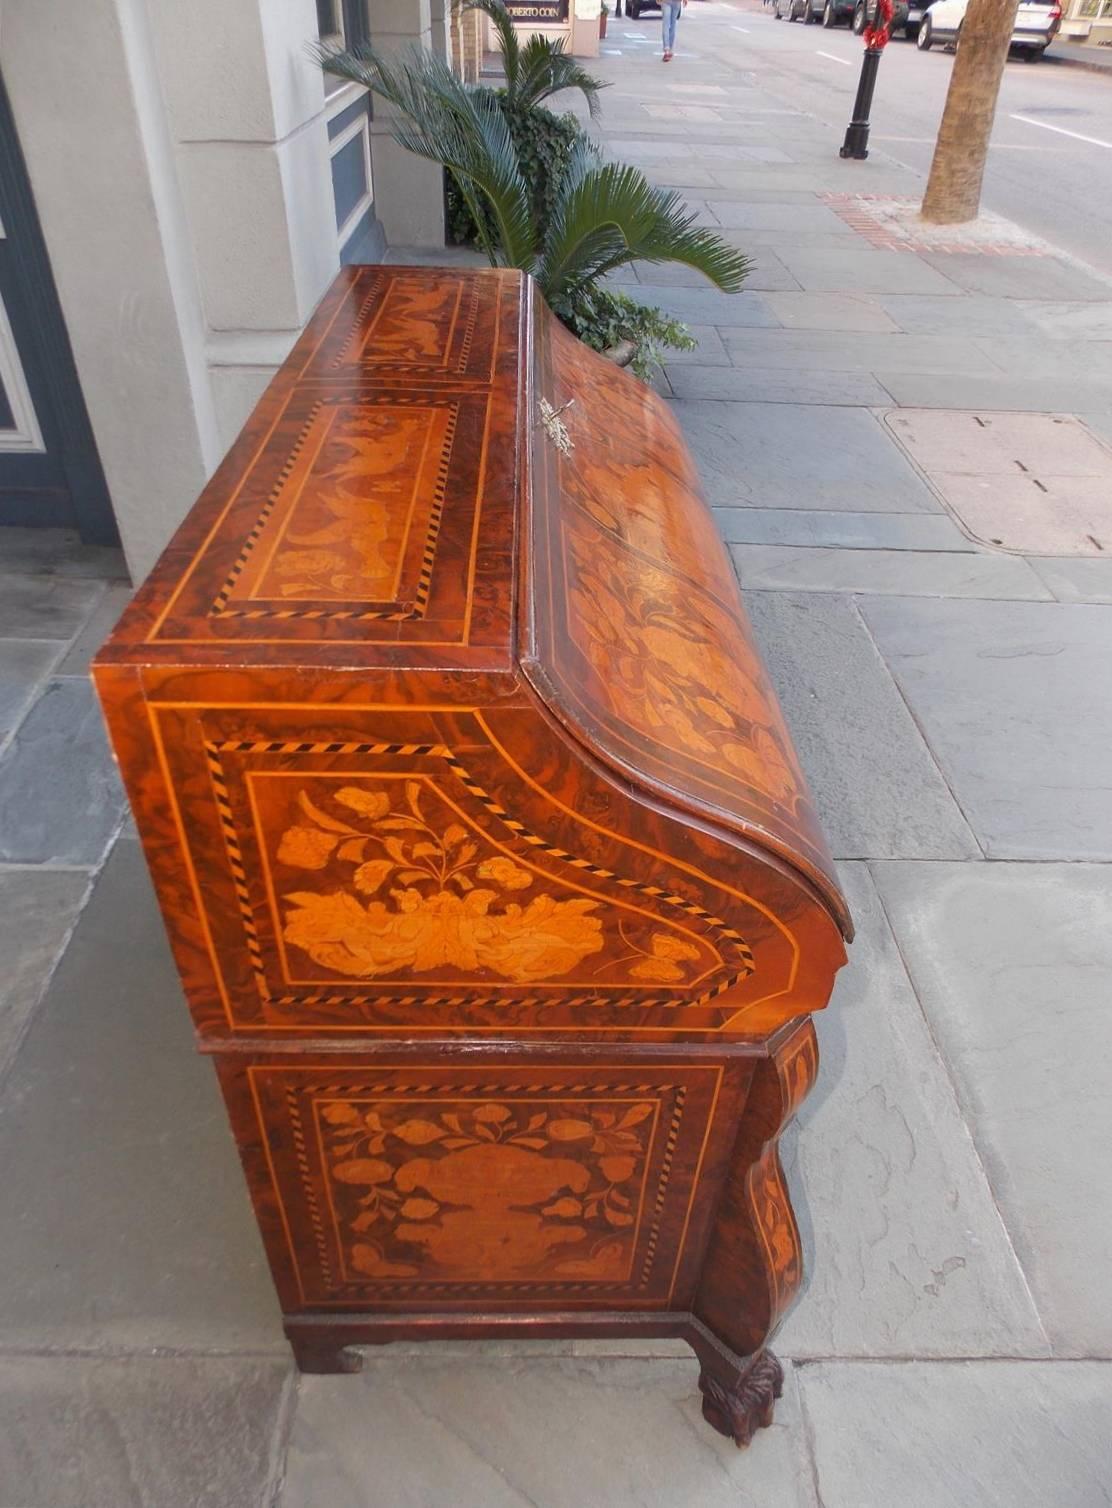 Hand-Carved Dutch Marquetry Burl Walnut Bombay Figural and Foliage Inlaid Desk, Circa 1850 For Sale